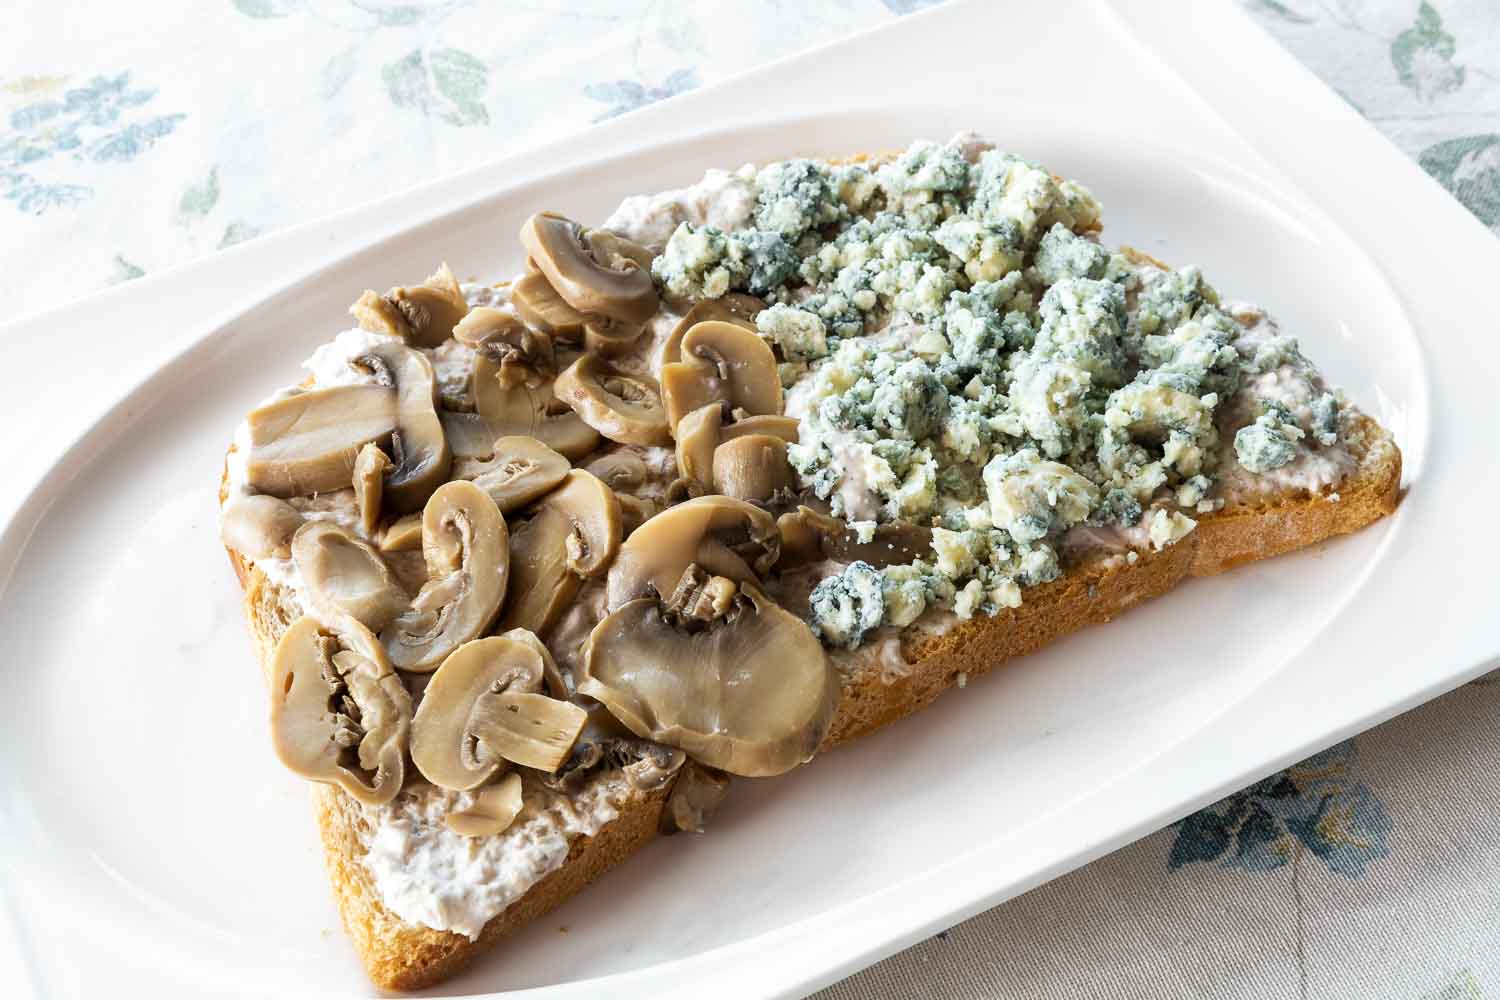 Blue cheese and mushrooms